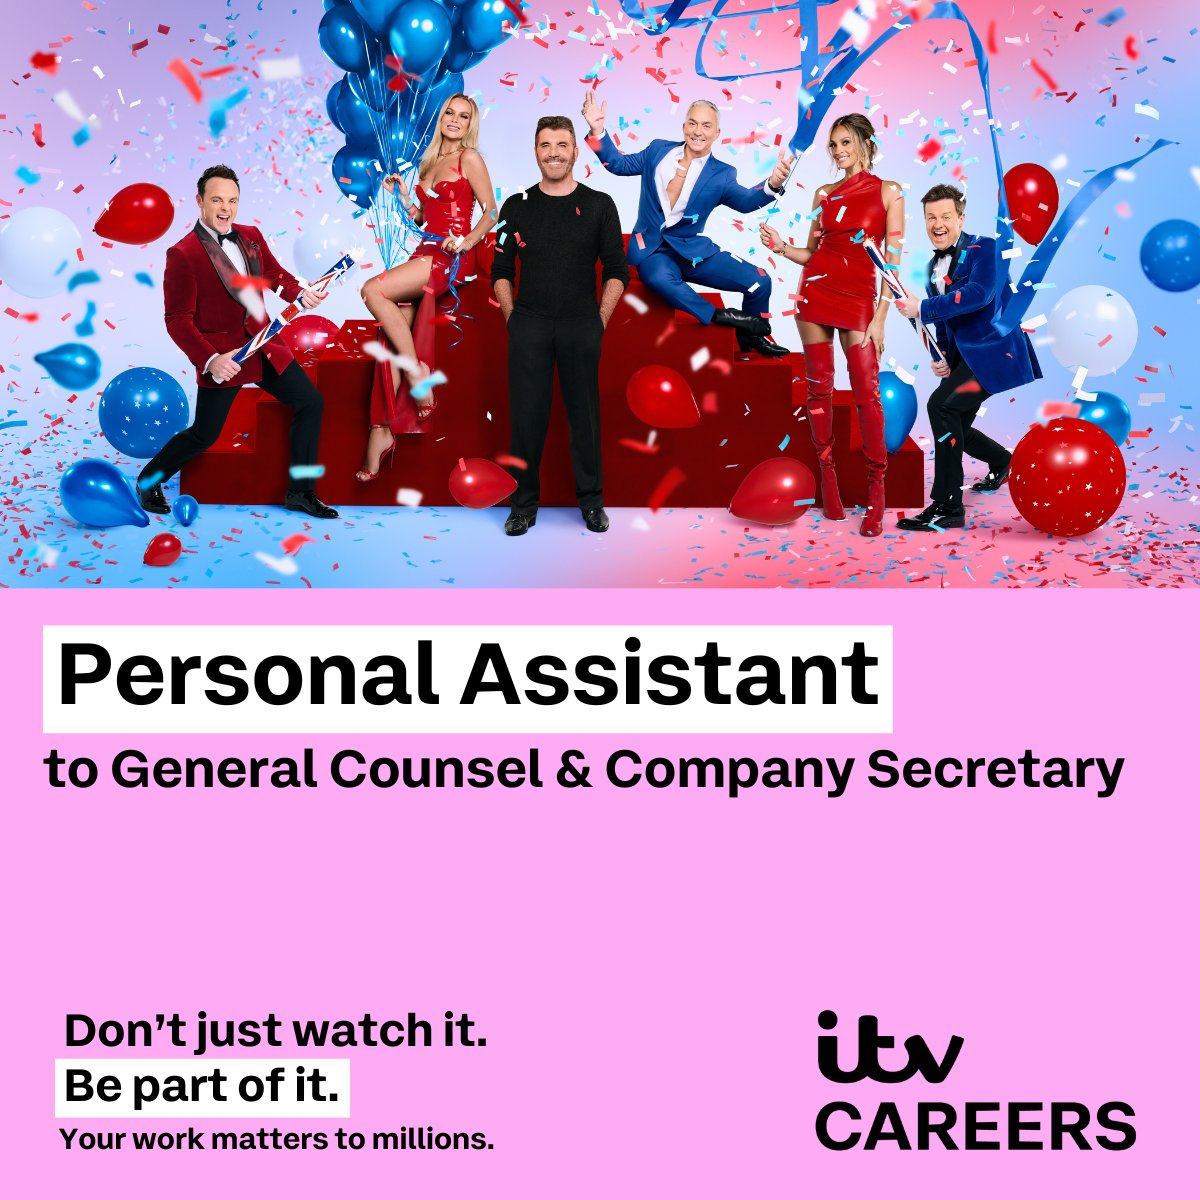 We have an exciting opportunity for a PA to join us. The successful candidate will be able an experienced PA who is able to work independently whilst supporting our General Counsel & Company Secretary.

Apply below:

lnkd.in/euWd5-Gp

#PAjobs #ITVCareers #Bepartofit